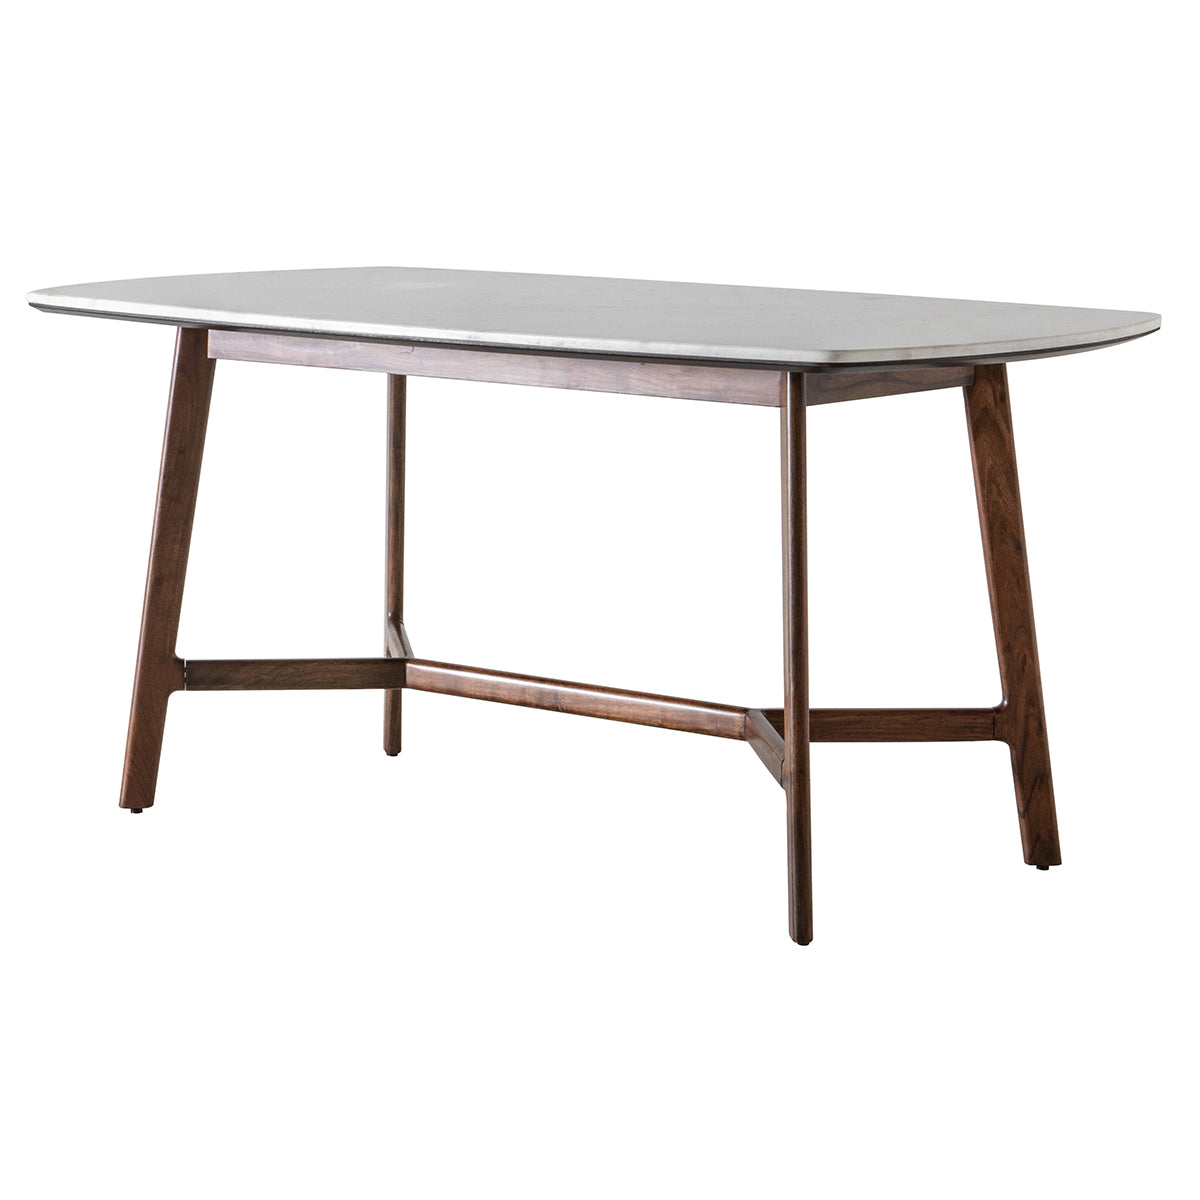 Fresca acacia wood dining table in rich walnut finish with marble top | MalletandPlane.com